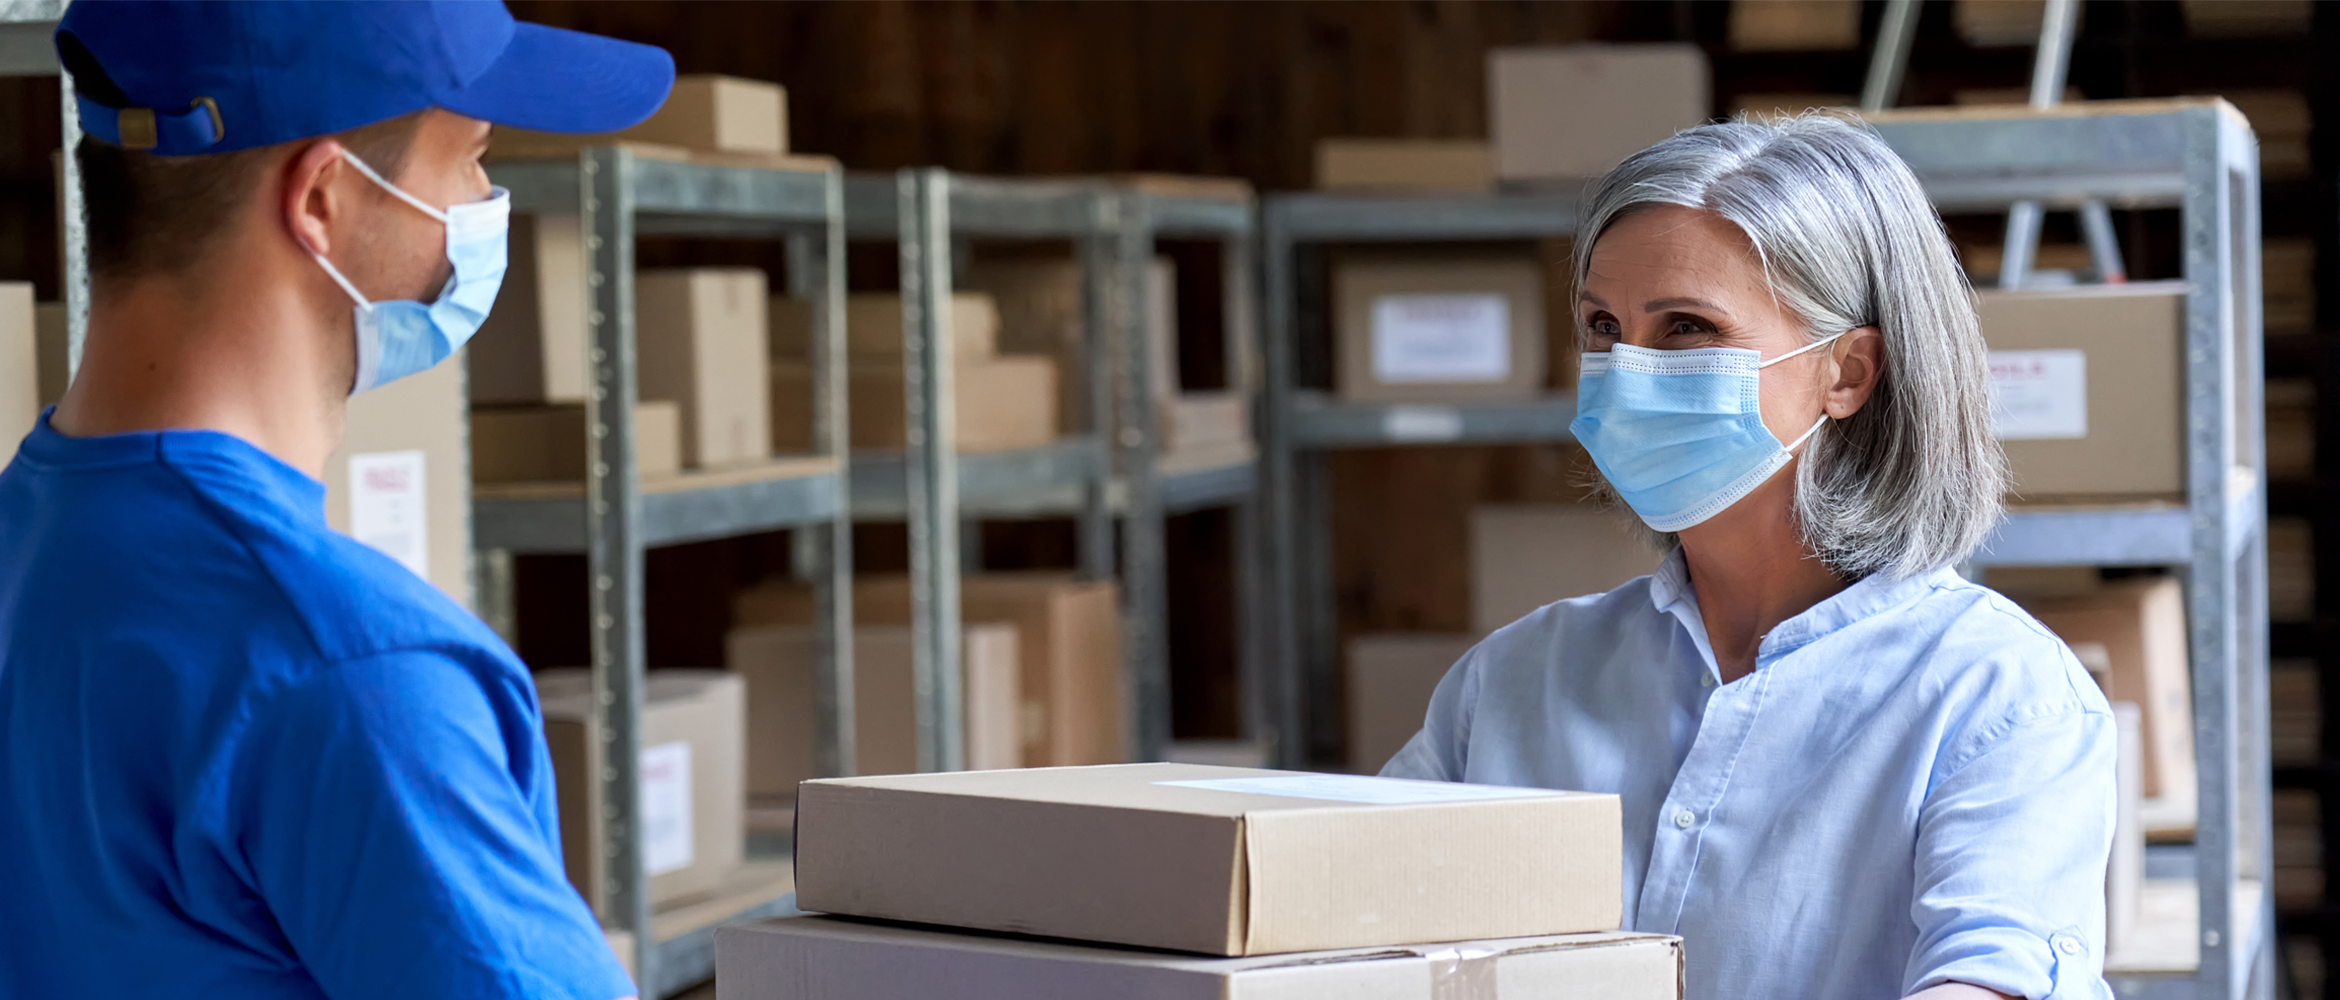 A logistics worker and a colleague wearing masks in a warehouse organizing cargo.